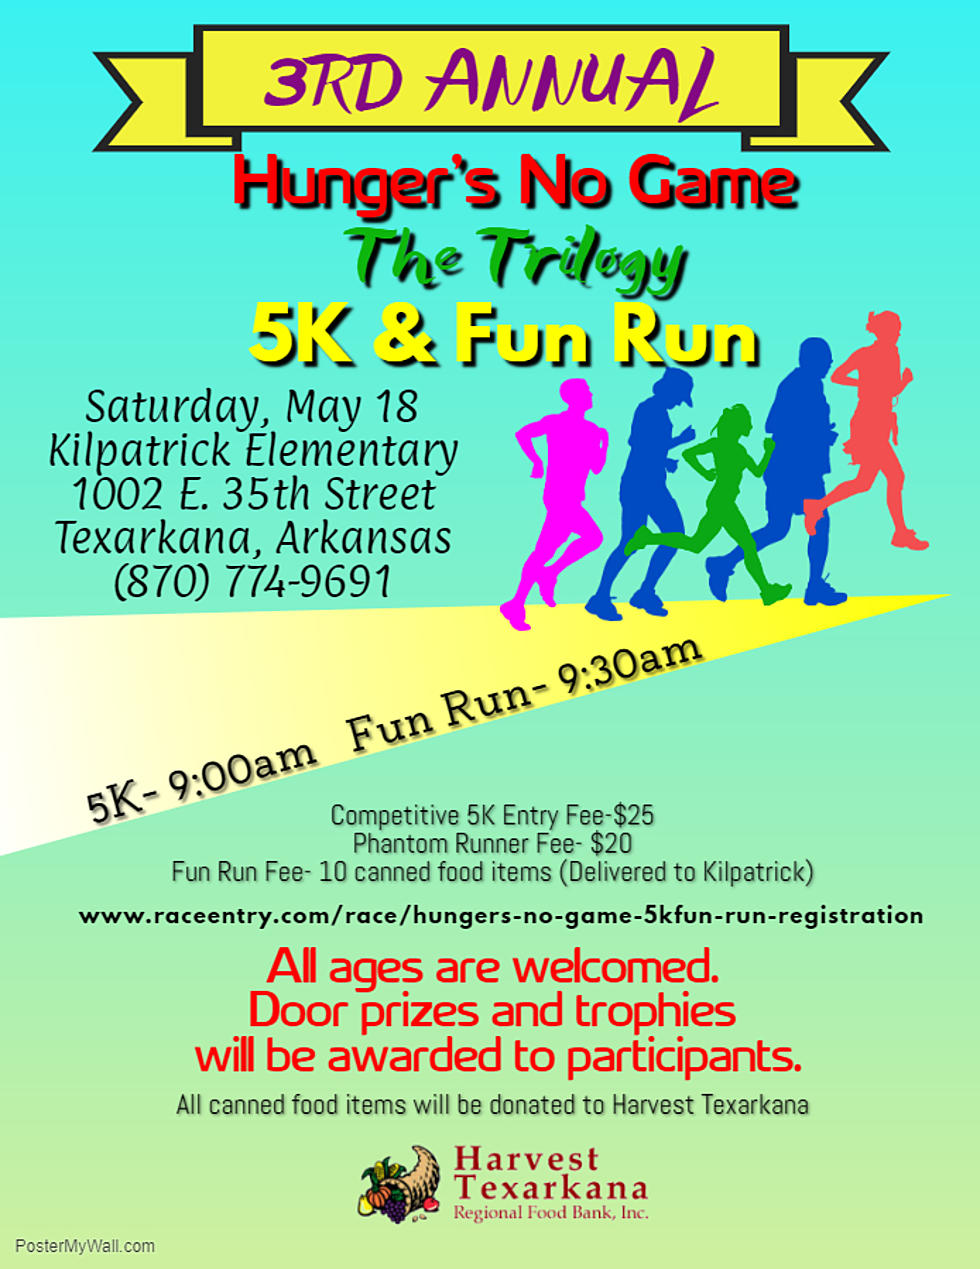 3rd Annual “Hunger’s No Game” Run to Benefit Harvest Texarkana